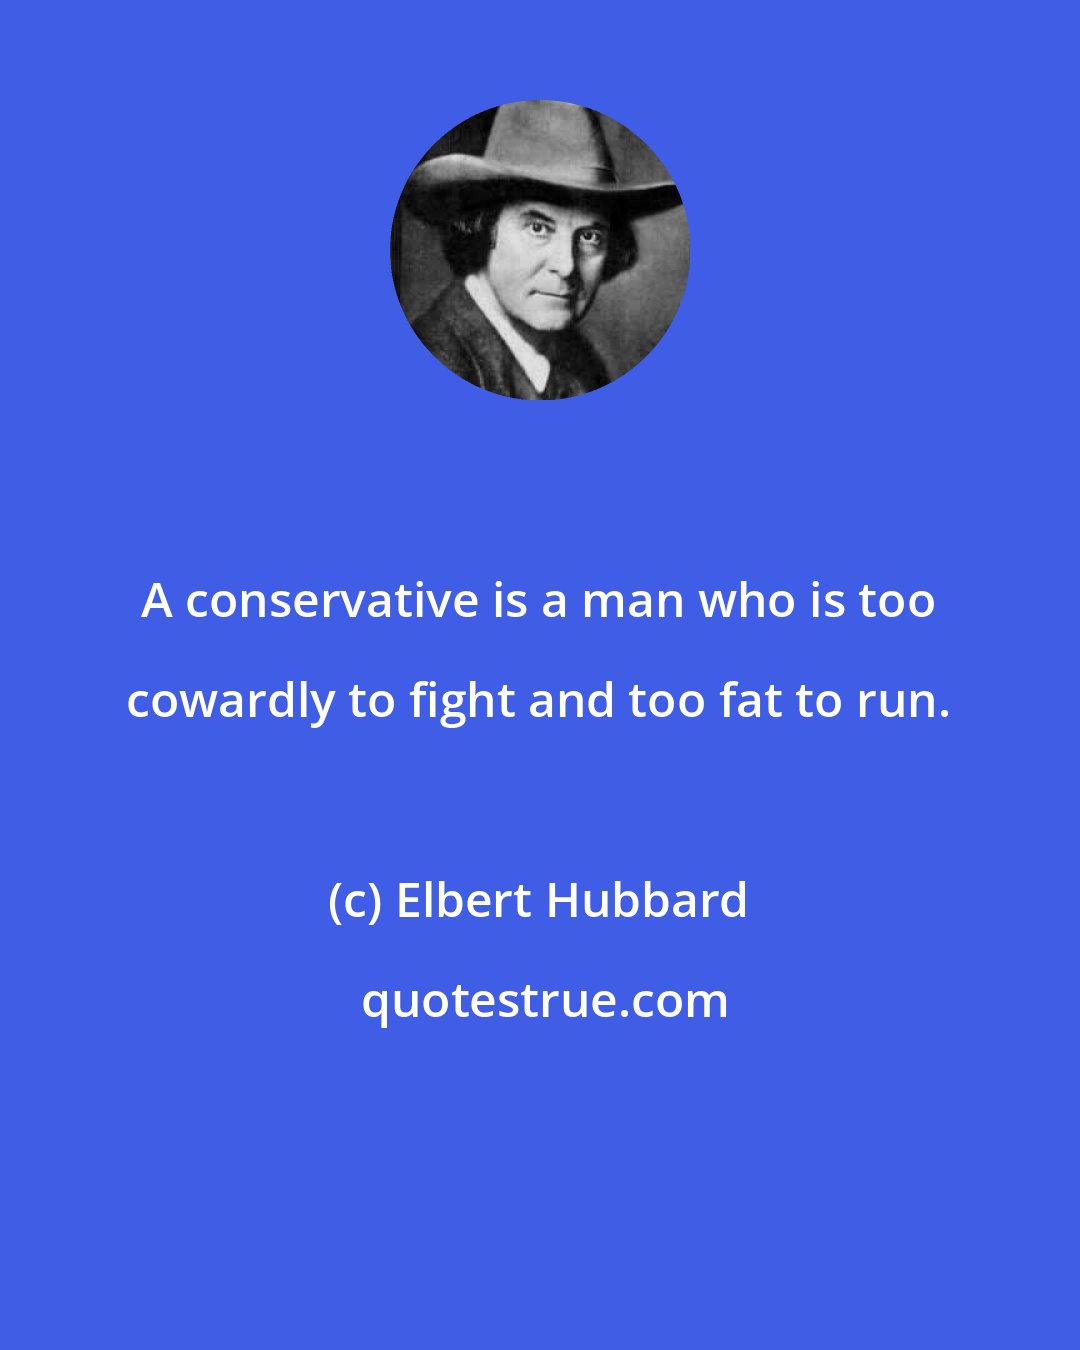 Elbert Hubbard: A conservative is a man who is too cowardly to fight and too fat to run.